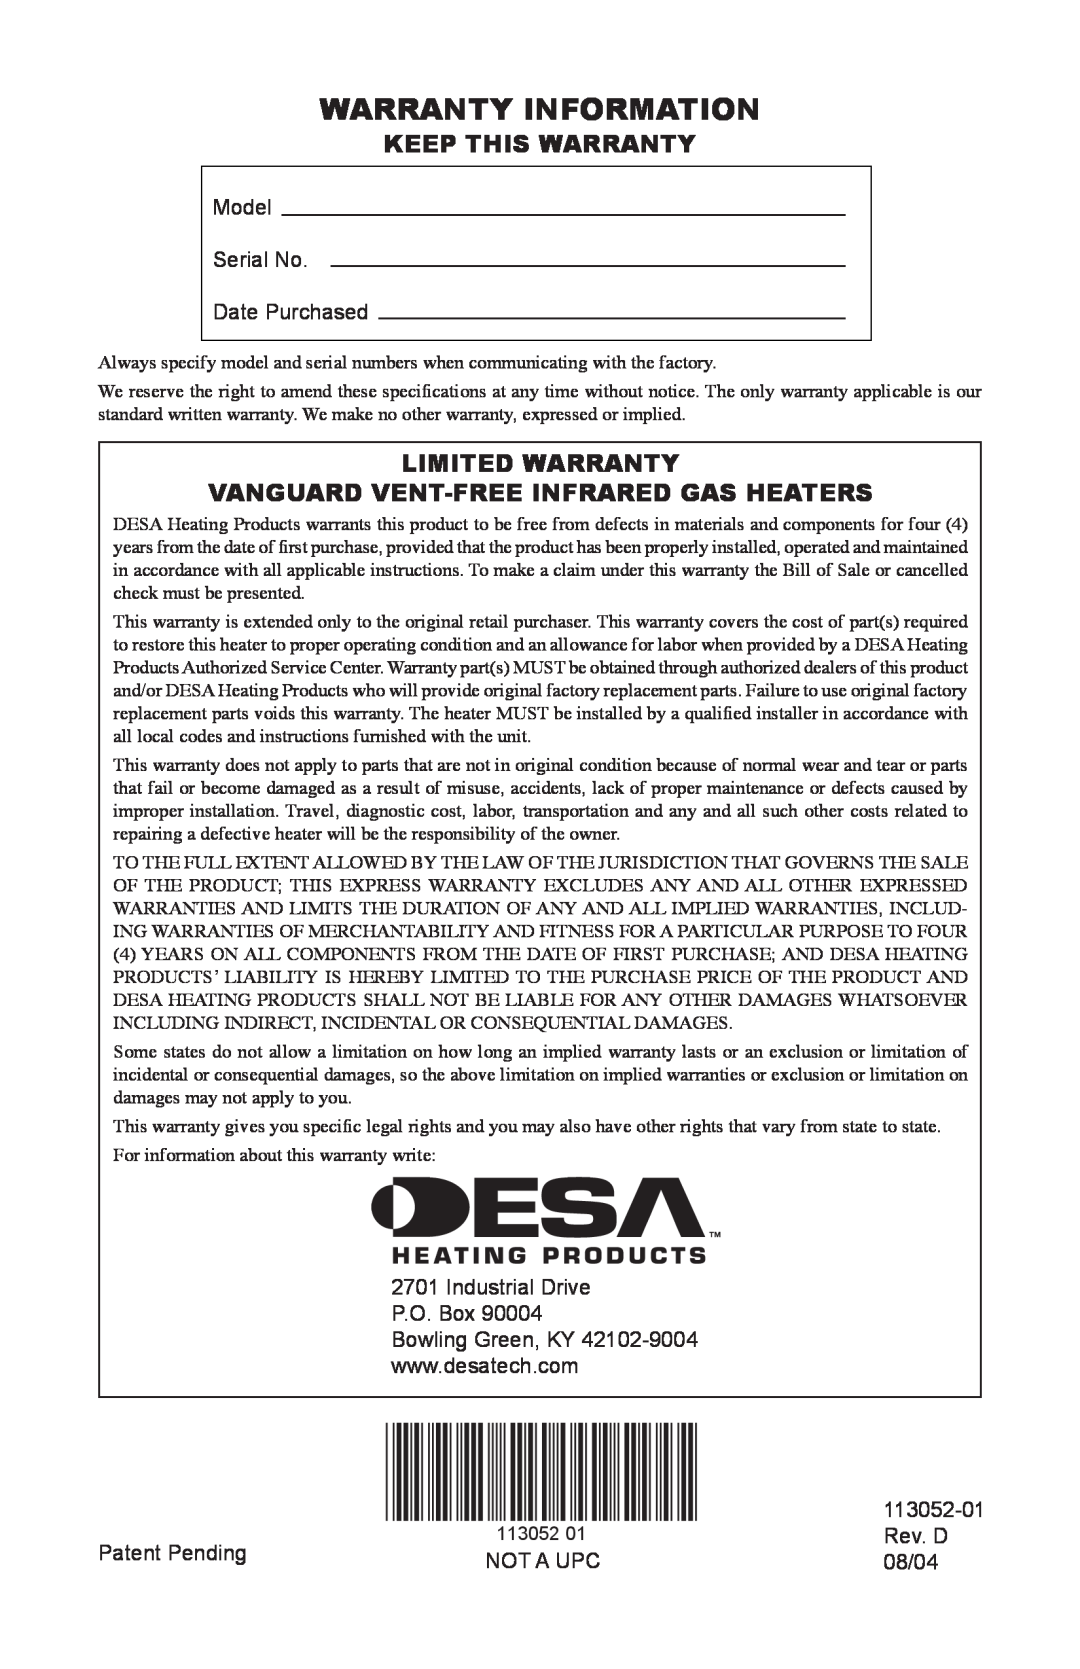 Desa VN18A, VP16A, VP26A Warranty Information, Keep This Warranty, Limited Warranty, Vanguard Vent-Freeinfrared Gas Heaters 